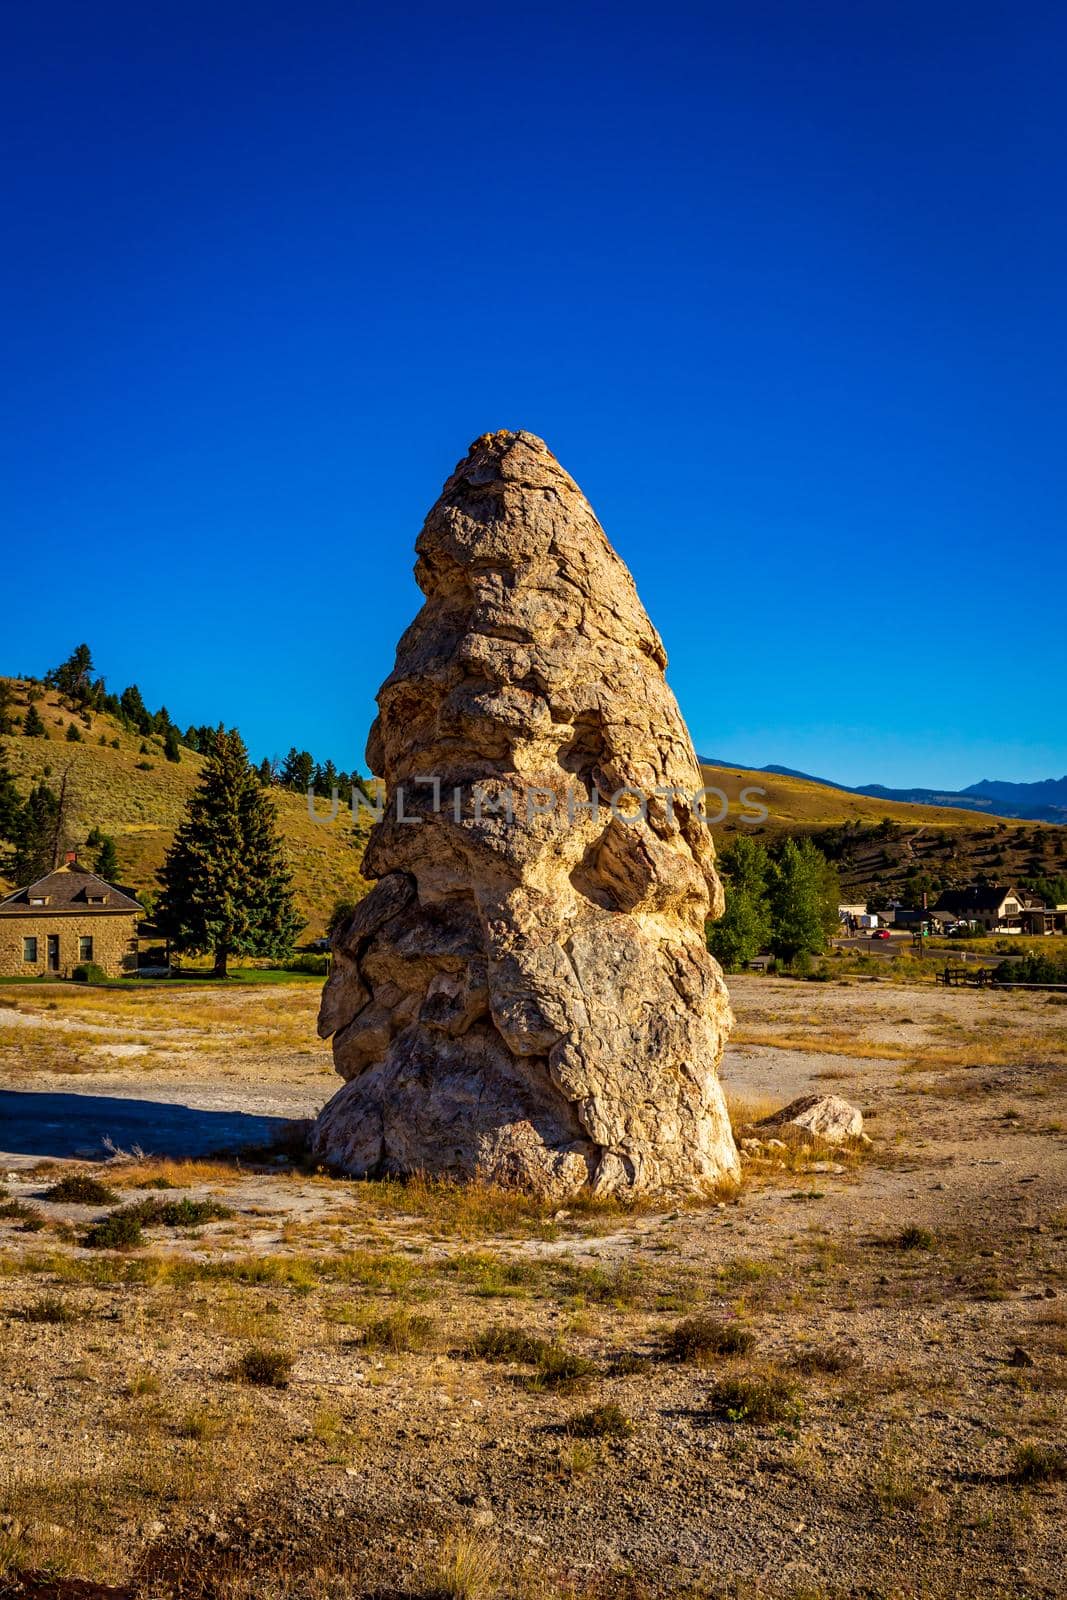 Liberty Cap is a dormant, 37-foot high hot spring cone in Mammoth Hot Springs, Yellowstone National Park